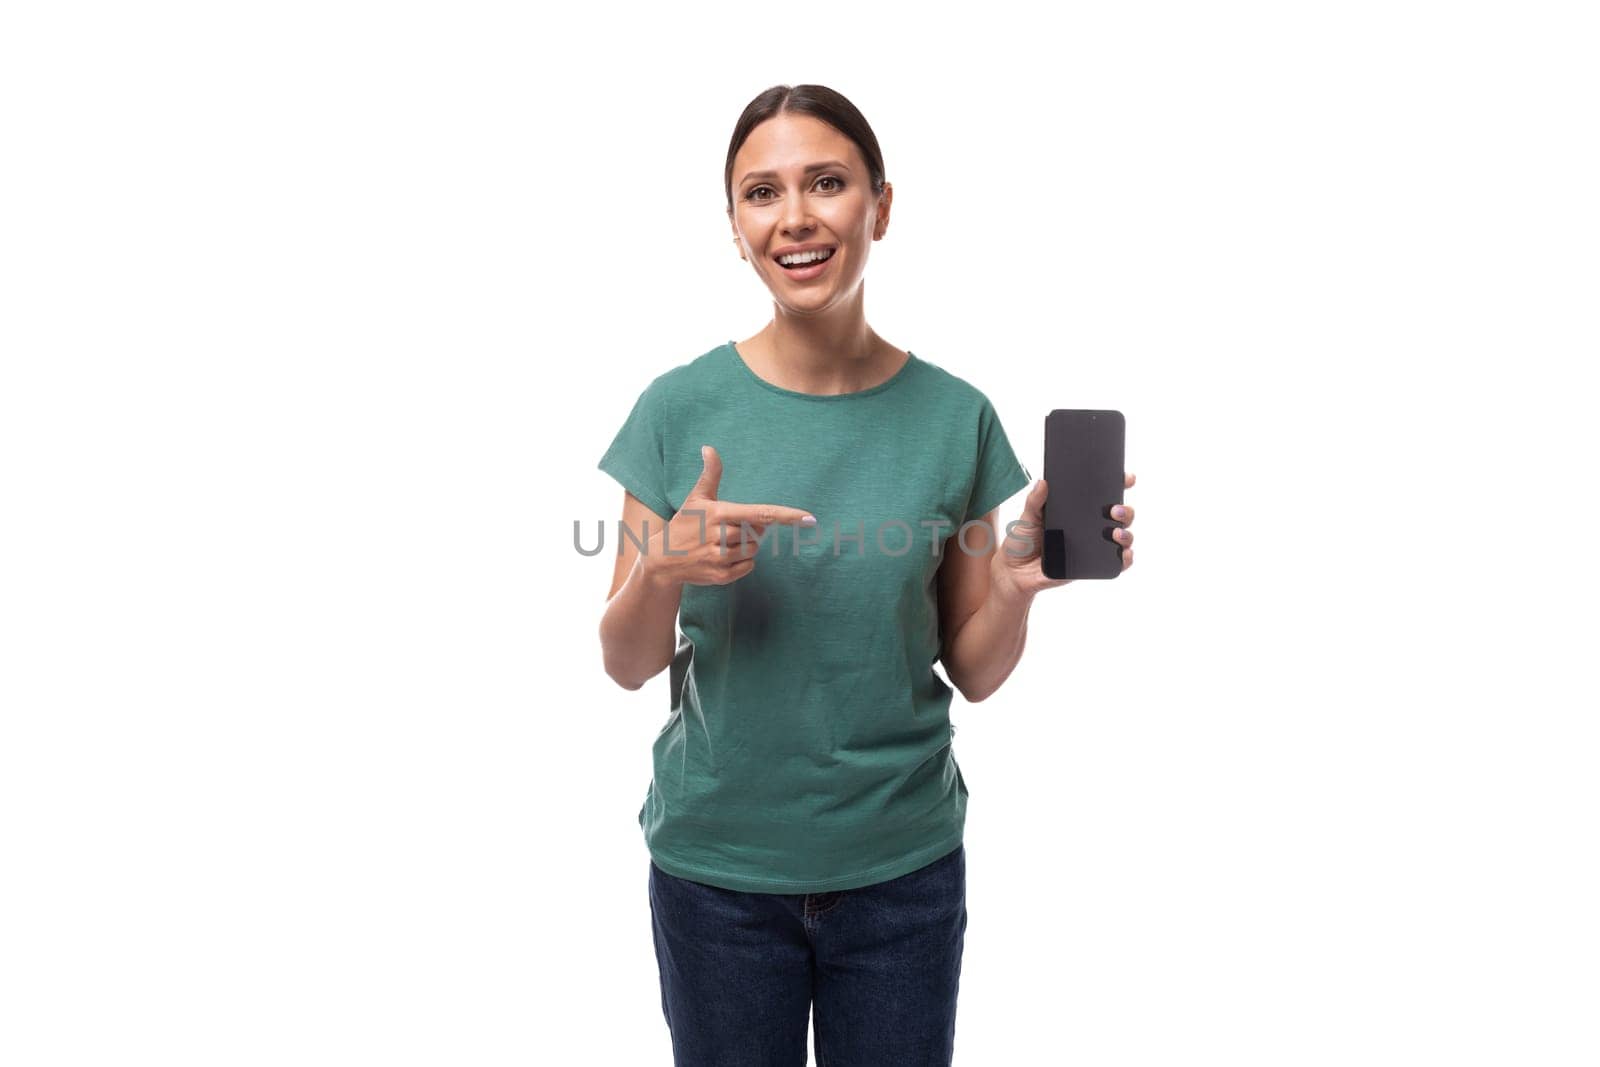 young energetic slender european woman with a ponytail hairstyle dressed in a green t-shirt holds a smartphone by TRMK